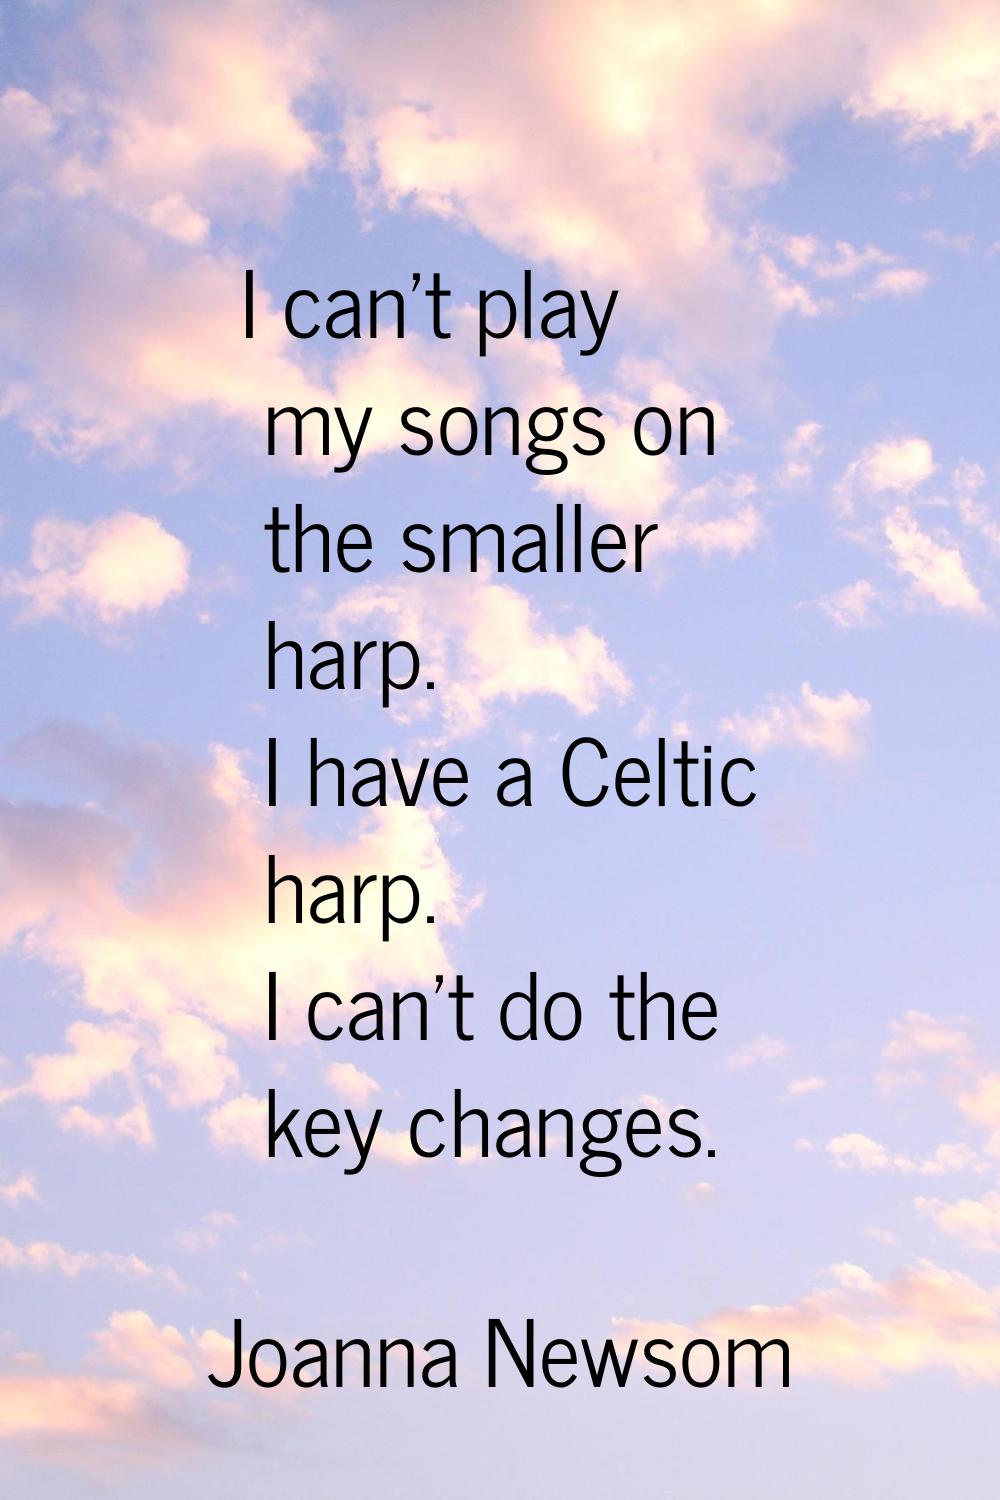 I can't play my songs on the smaller harp. I have a Celtic harp. I can't do the key changes.